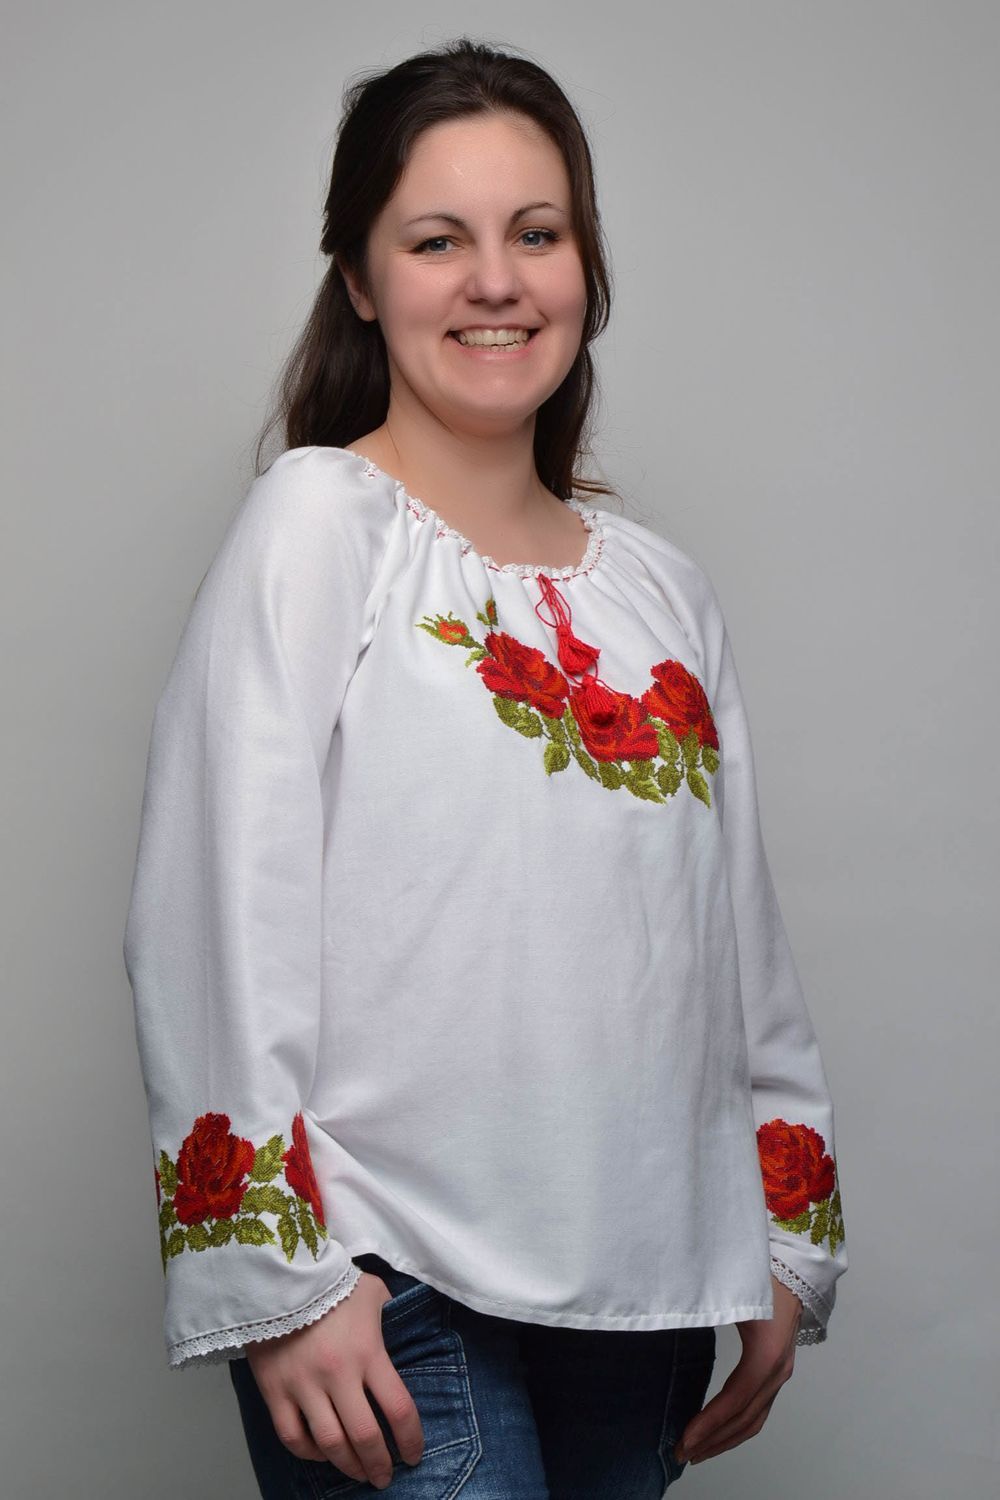 Women's embroidered blouse photo 1